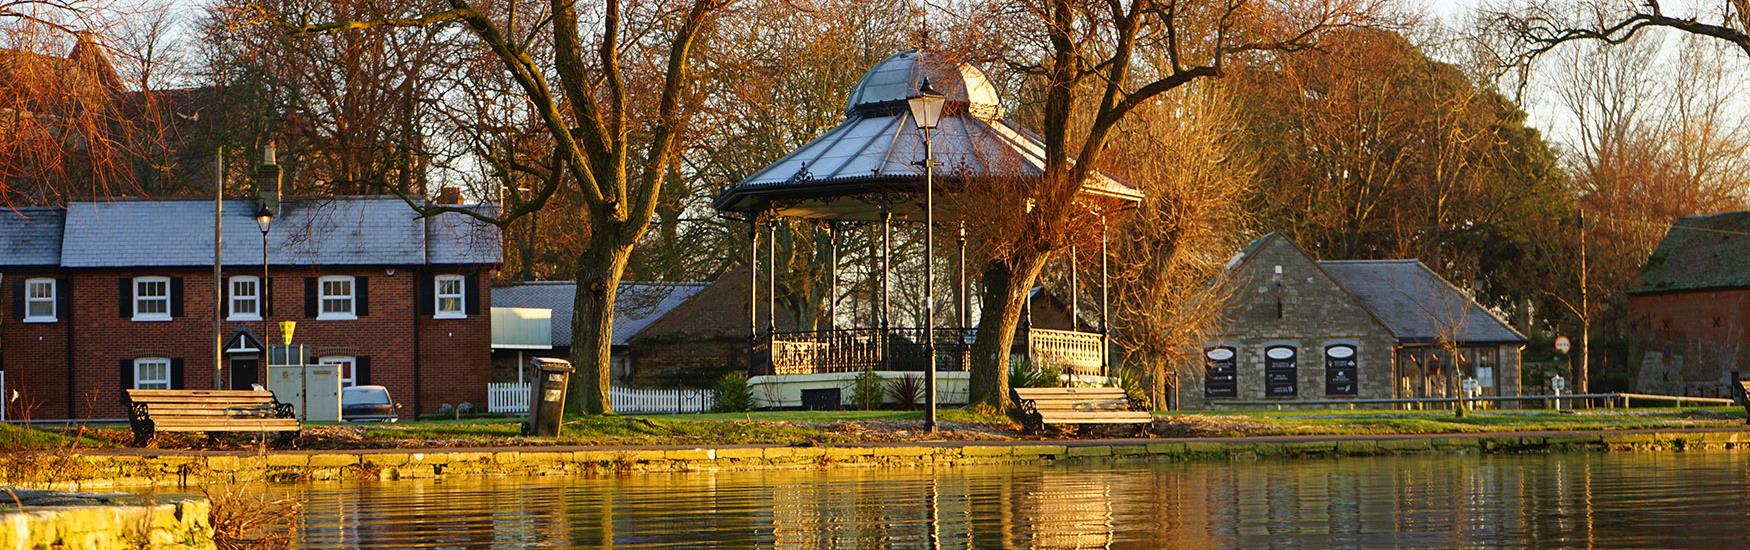 Autumnal scenes surround the Christchurch bandstand next to the quay